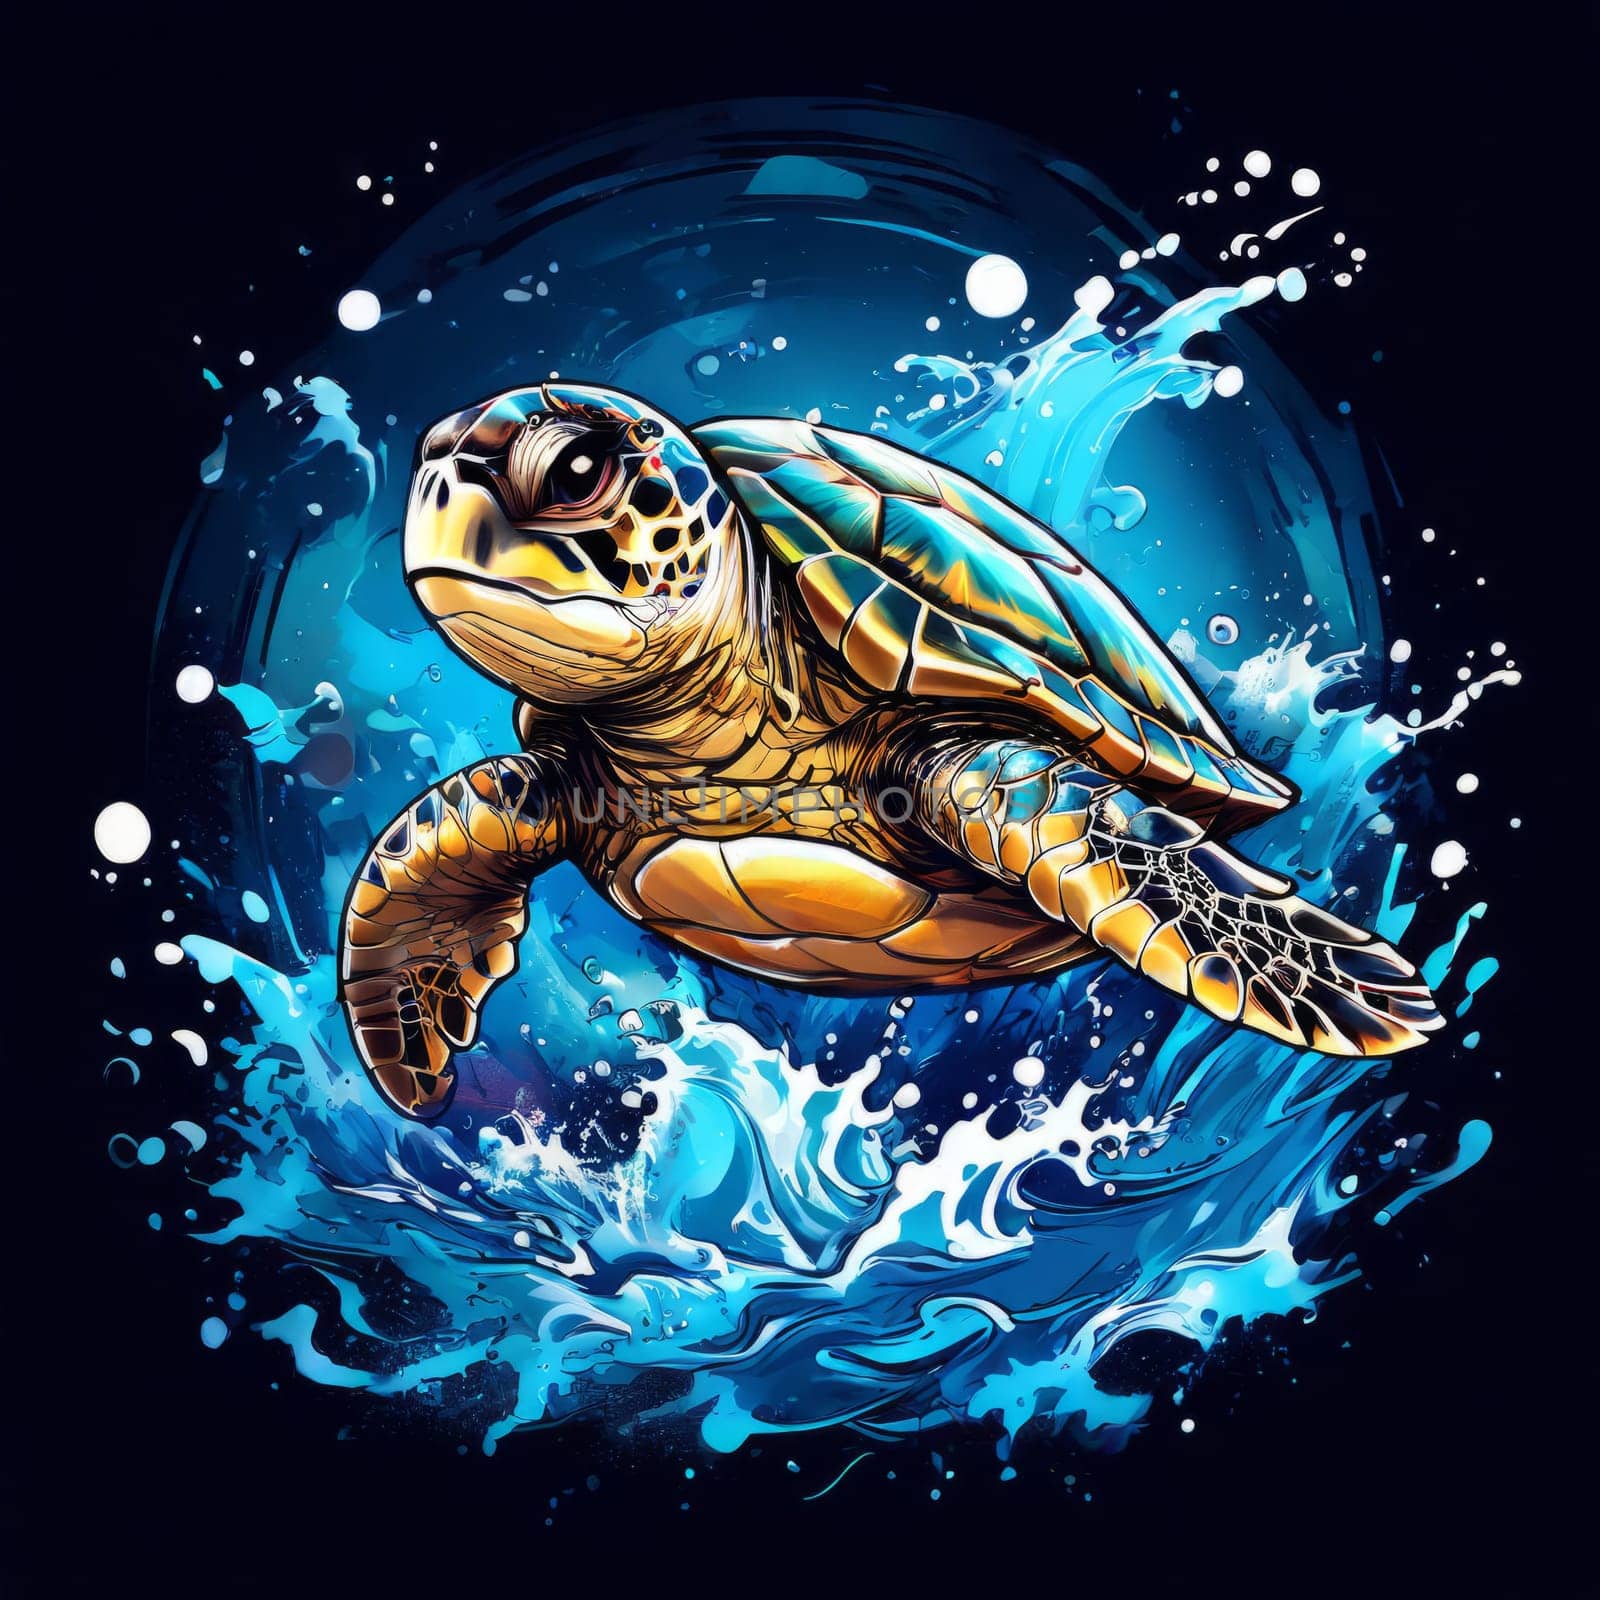 Turtle gracefully swimming in water. For educational materials for kids, game design, animated movies, tourism, stationery, Tshirt design, posters, postcards, childrens books. by Angelsmoon